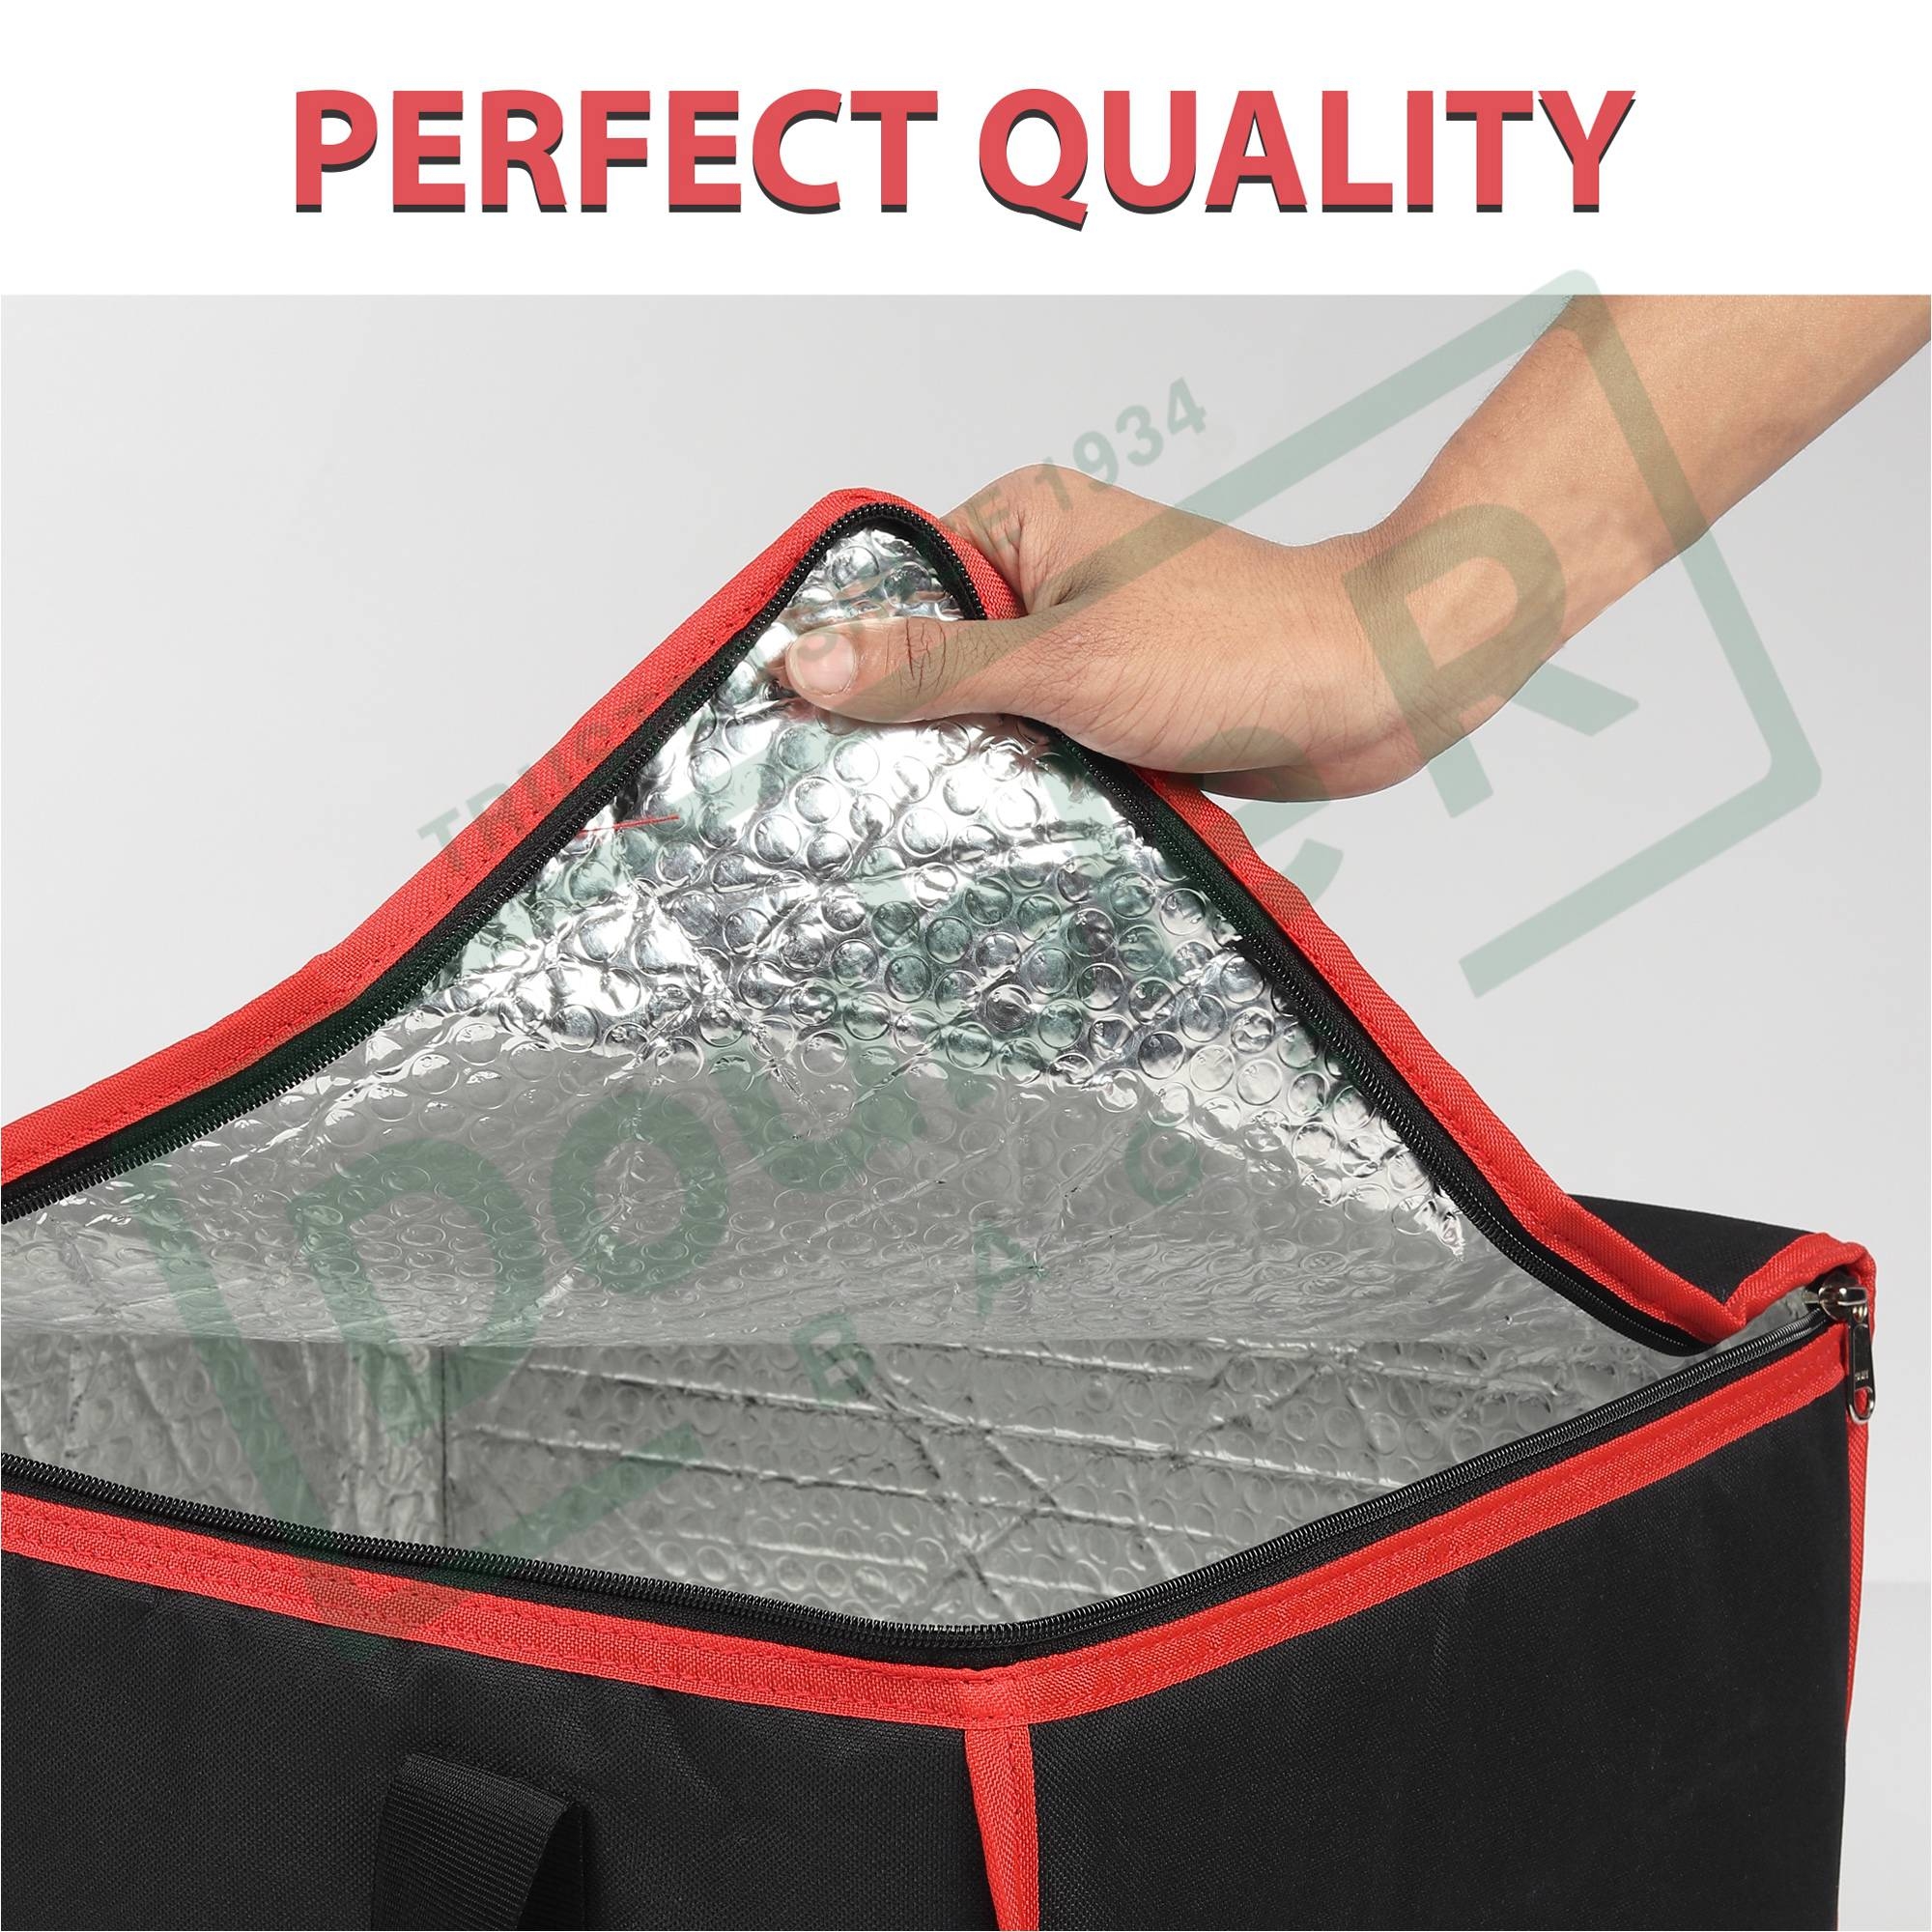 DOUBLE R BAGS | DOUBLE R BAGS Thermal Bags for Cold and hot Food Bag (Red) 6